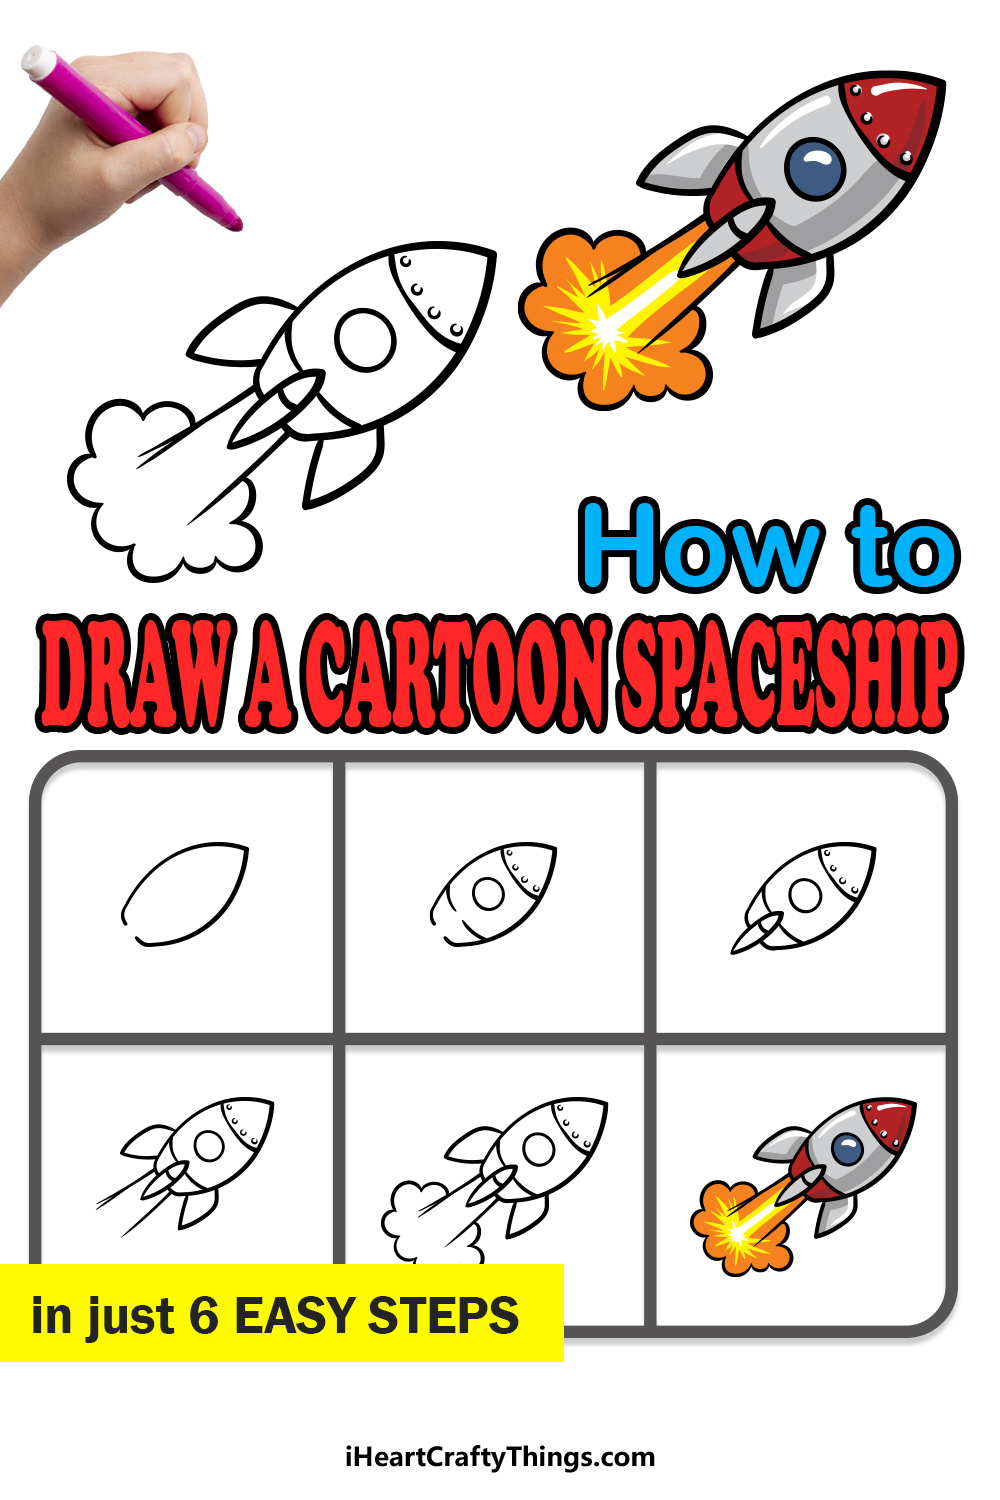 how to draw a cartoon spaceship in 6 easy steps